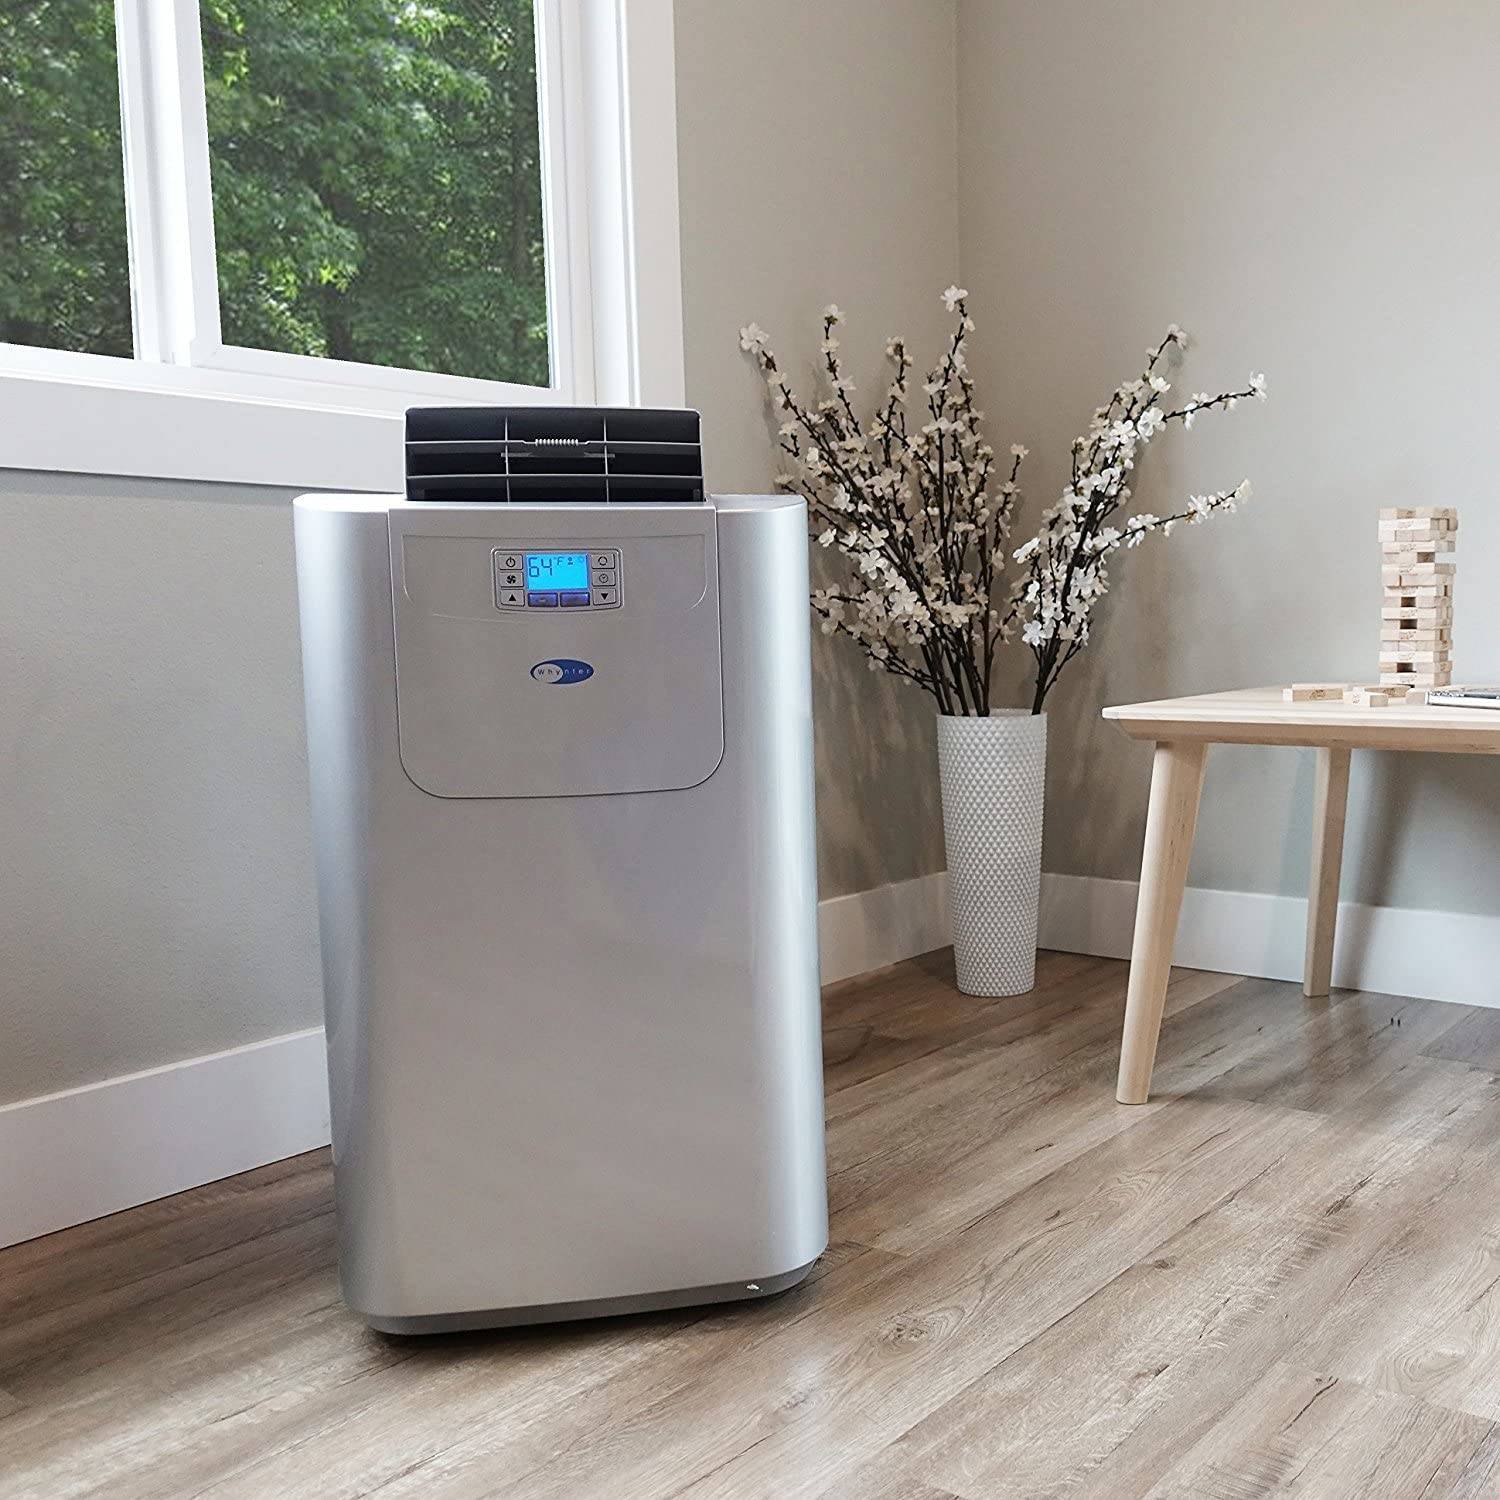 8000 Btu Air Conditioner: Does It Include Right For My Size Of Room?